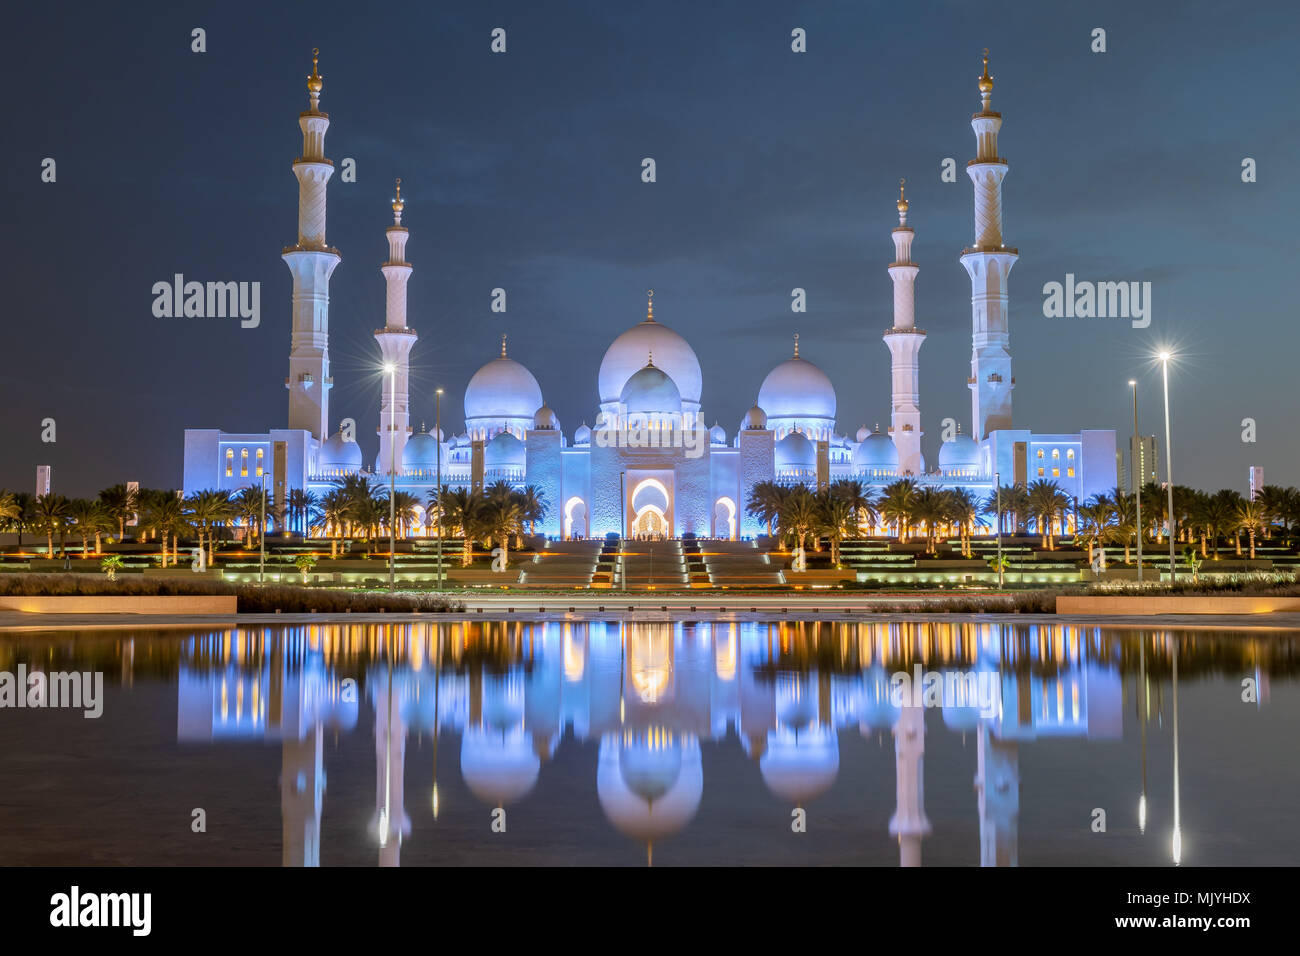 Sheikh Zayed Grand Mosque in Abu Dhabi, capital city of the United Arab Emirates. Mosque is built from Italian white marble. Reflection in lake Stock Photo